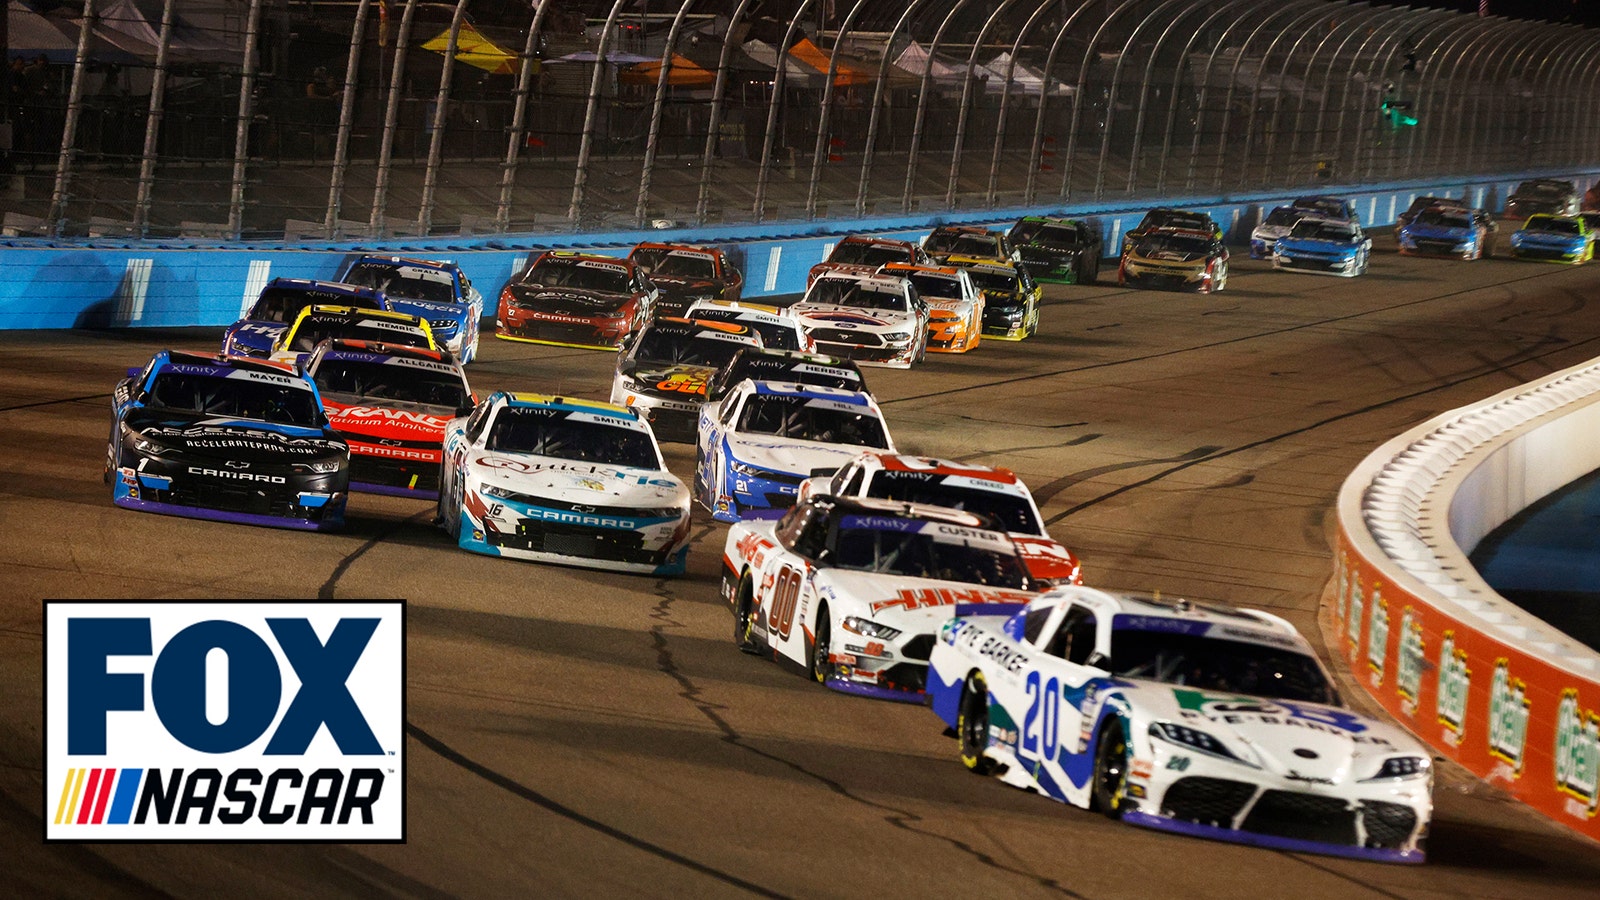 Full highlights from the Xfinity Series Championship at Phoenix Raceway